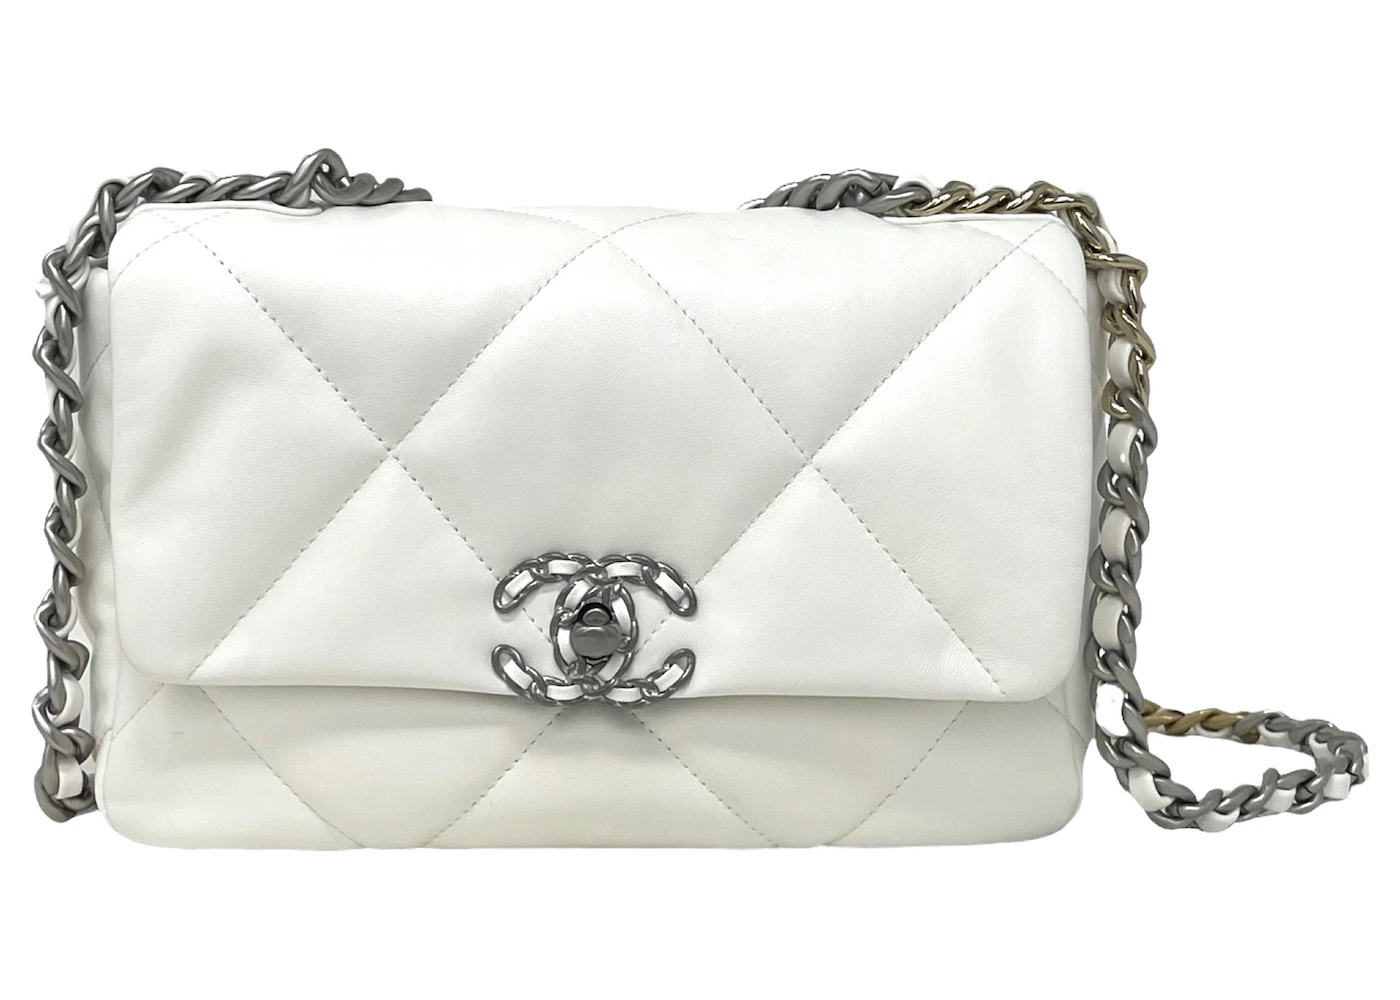 chanel white leather bags handbags